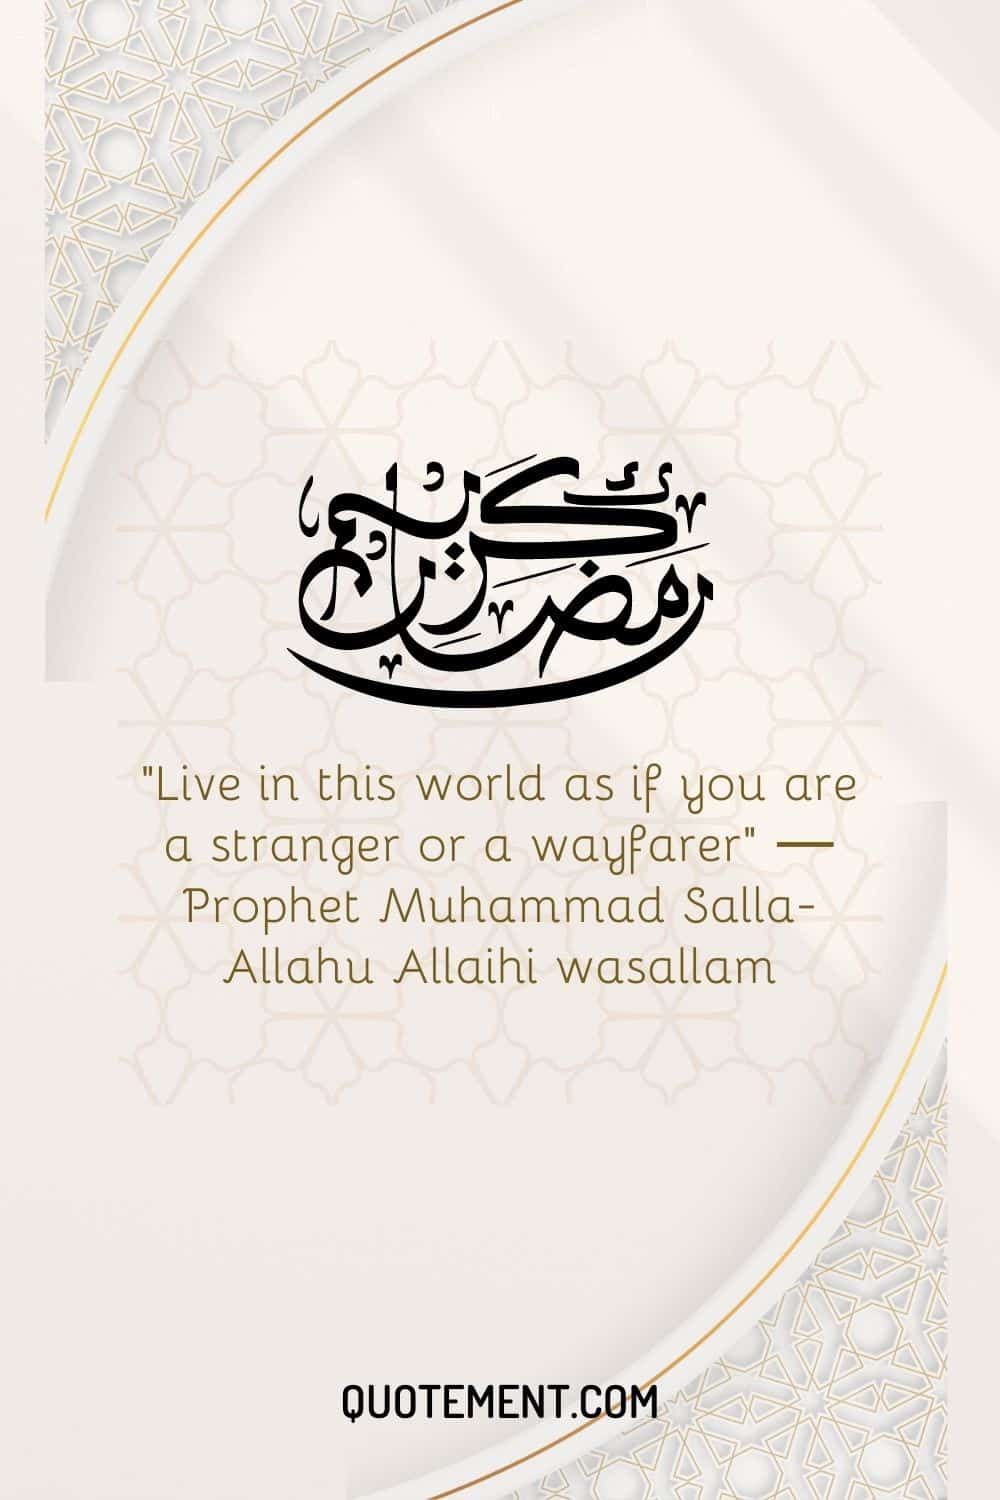 Live in this world as if you are a stranger or a wayfarer (2)